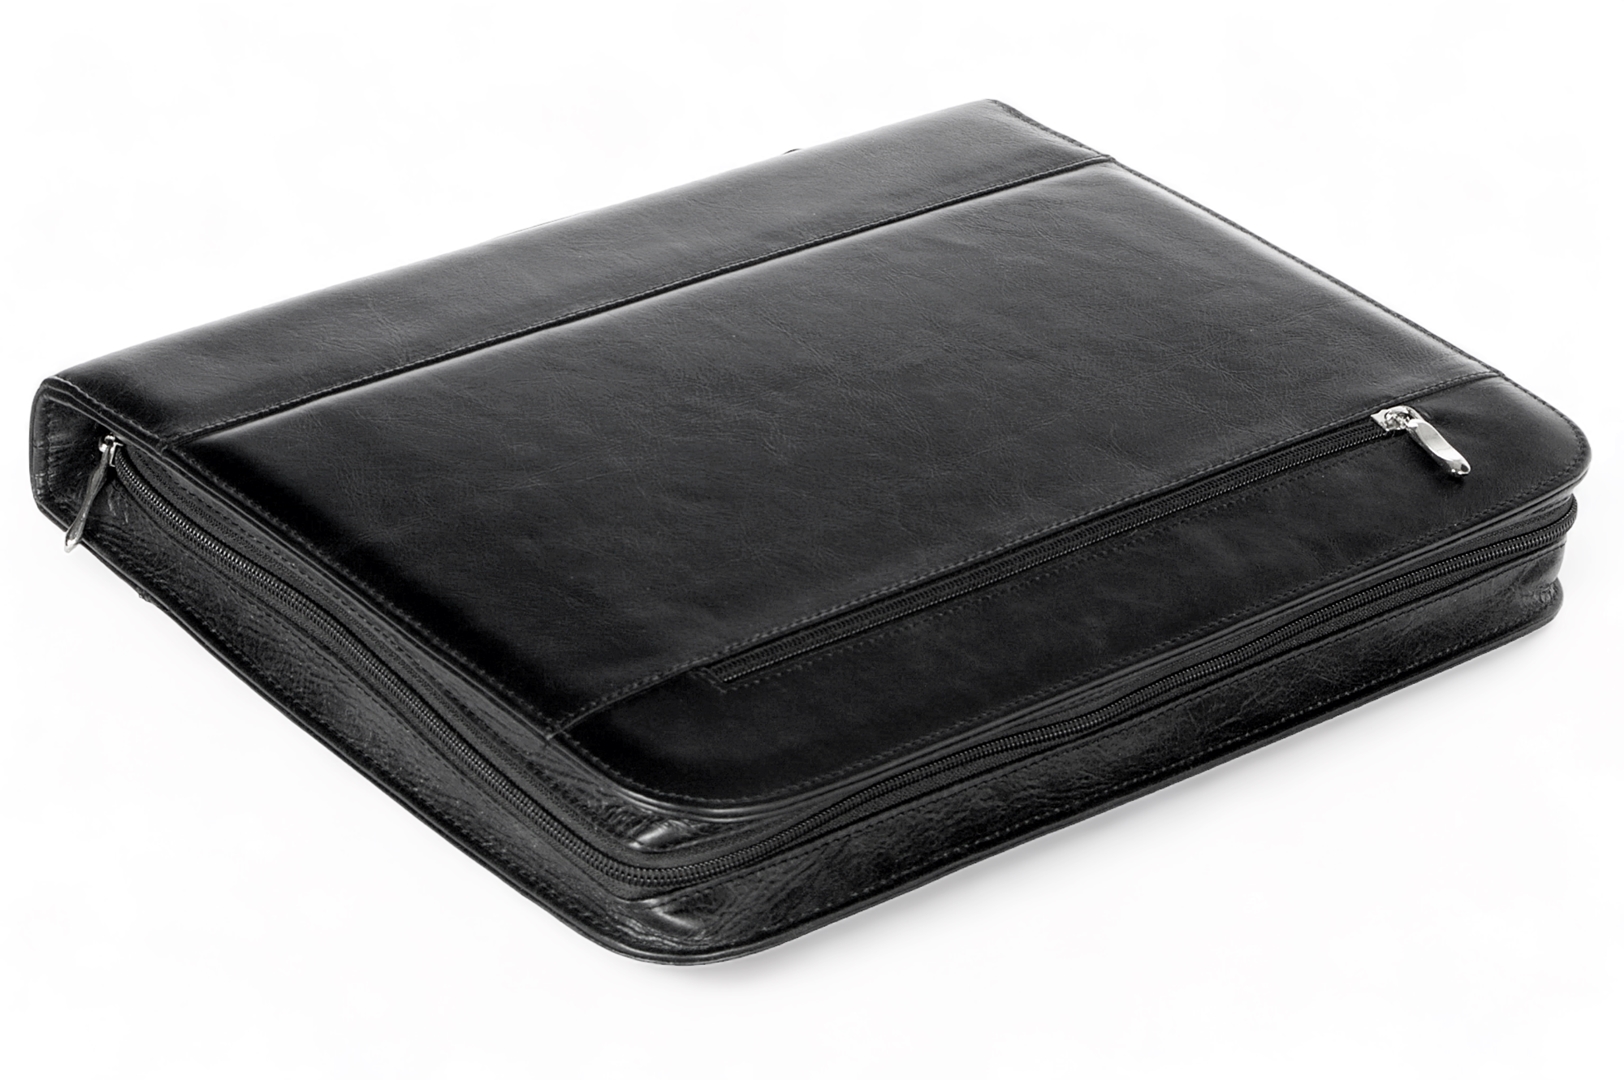 A4 zippered conference folder made of genuine leather. 19R BL 0-1F